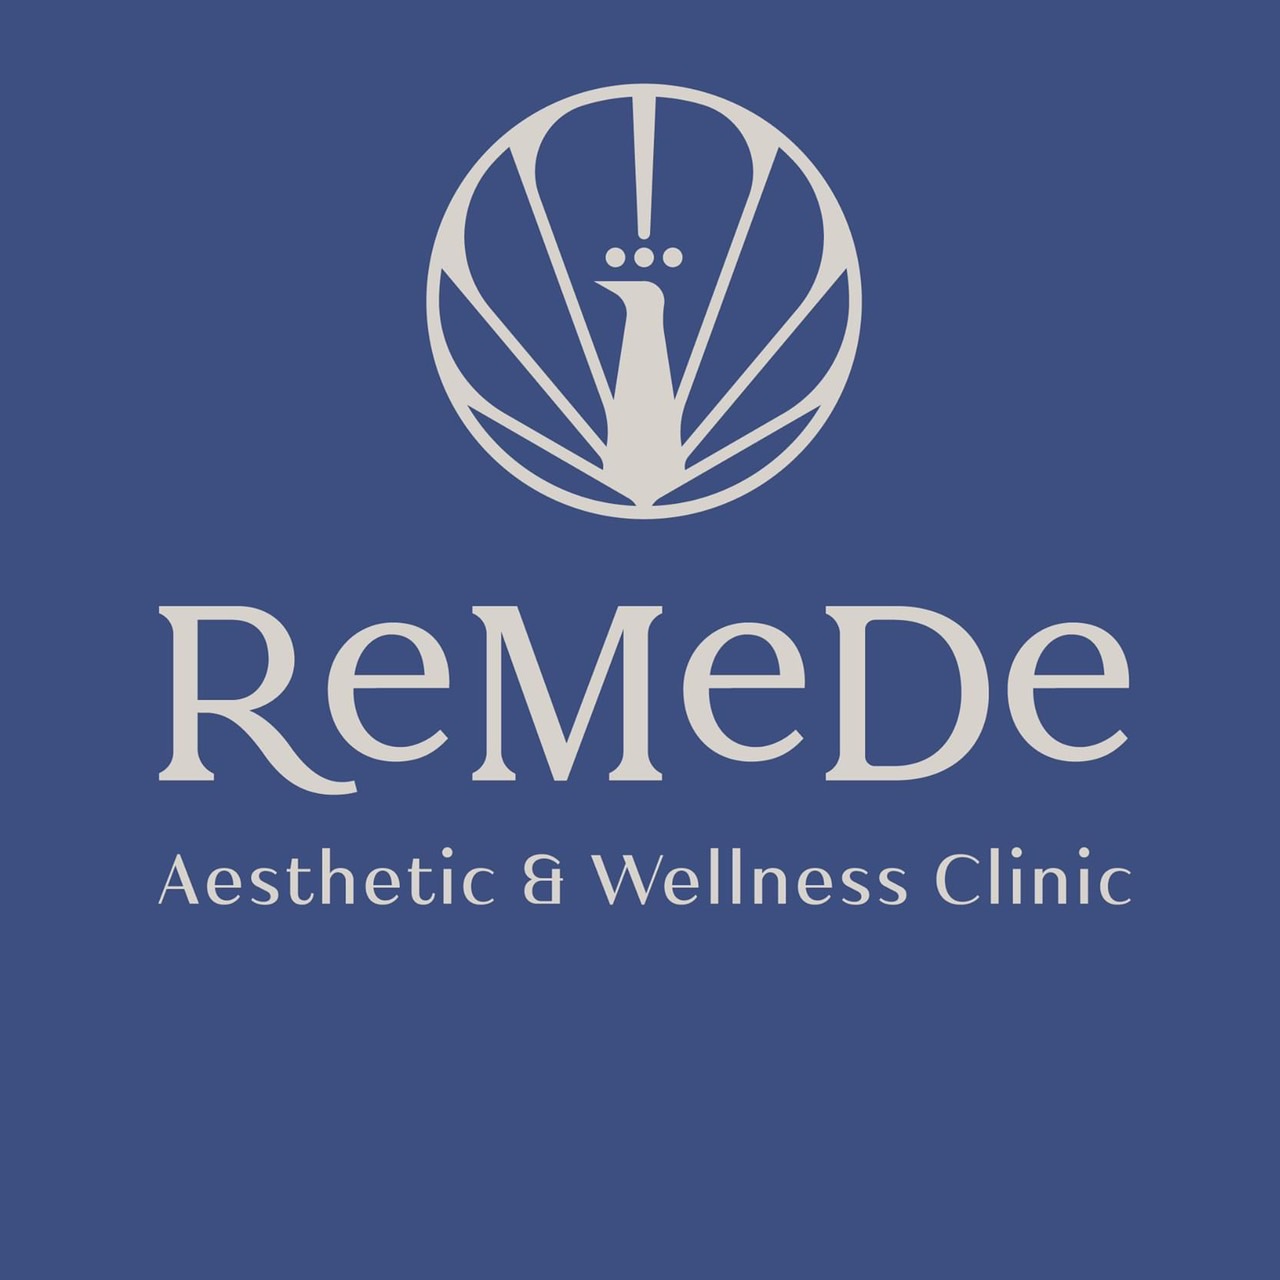 Remede Aesthetic & Wellness Clinic